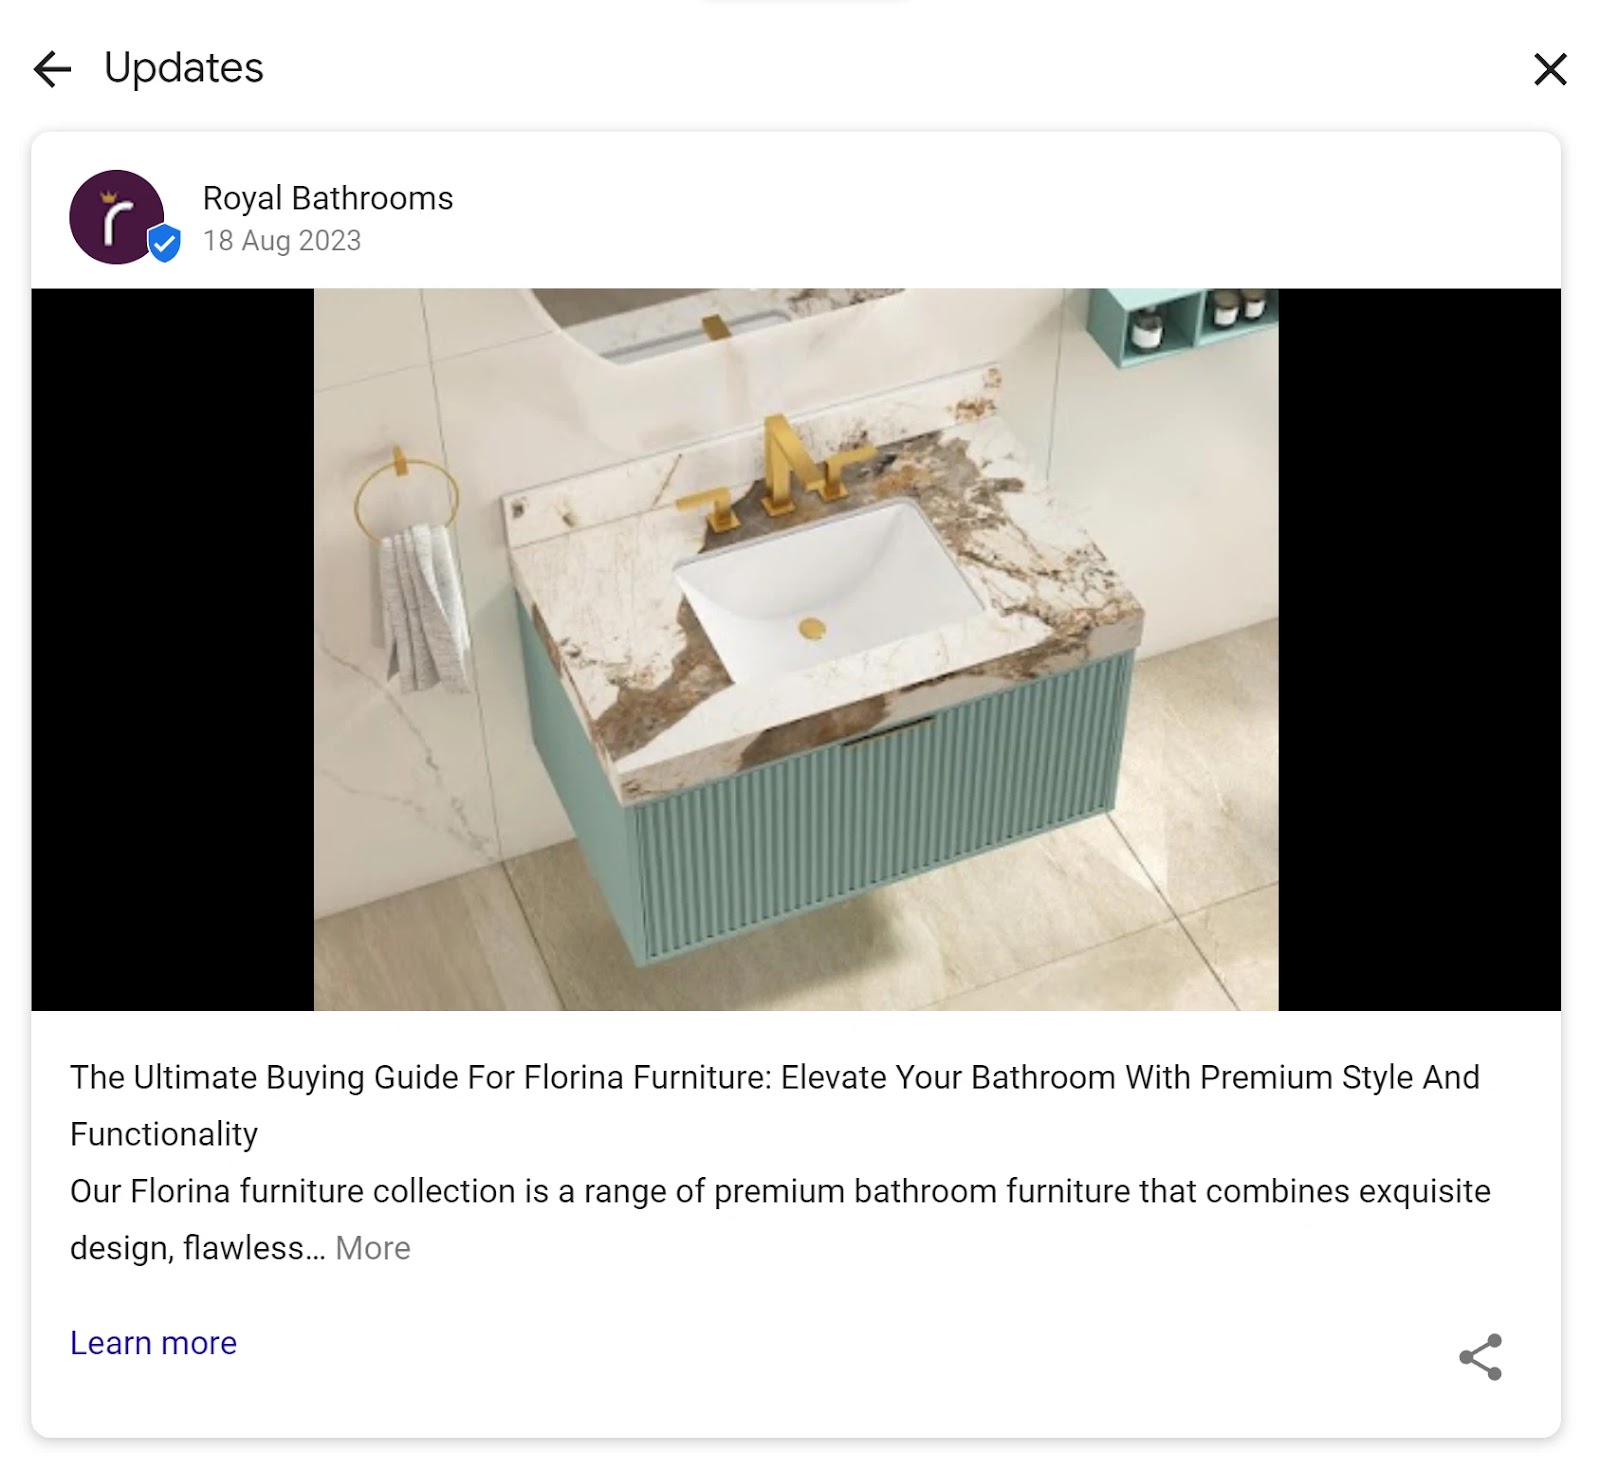 Royal Bathrooms’ GBP post uses a professional photo